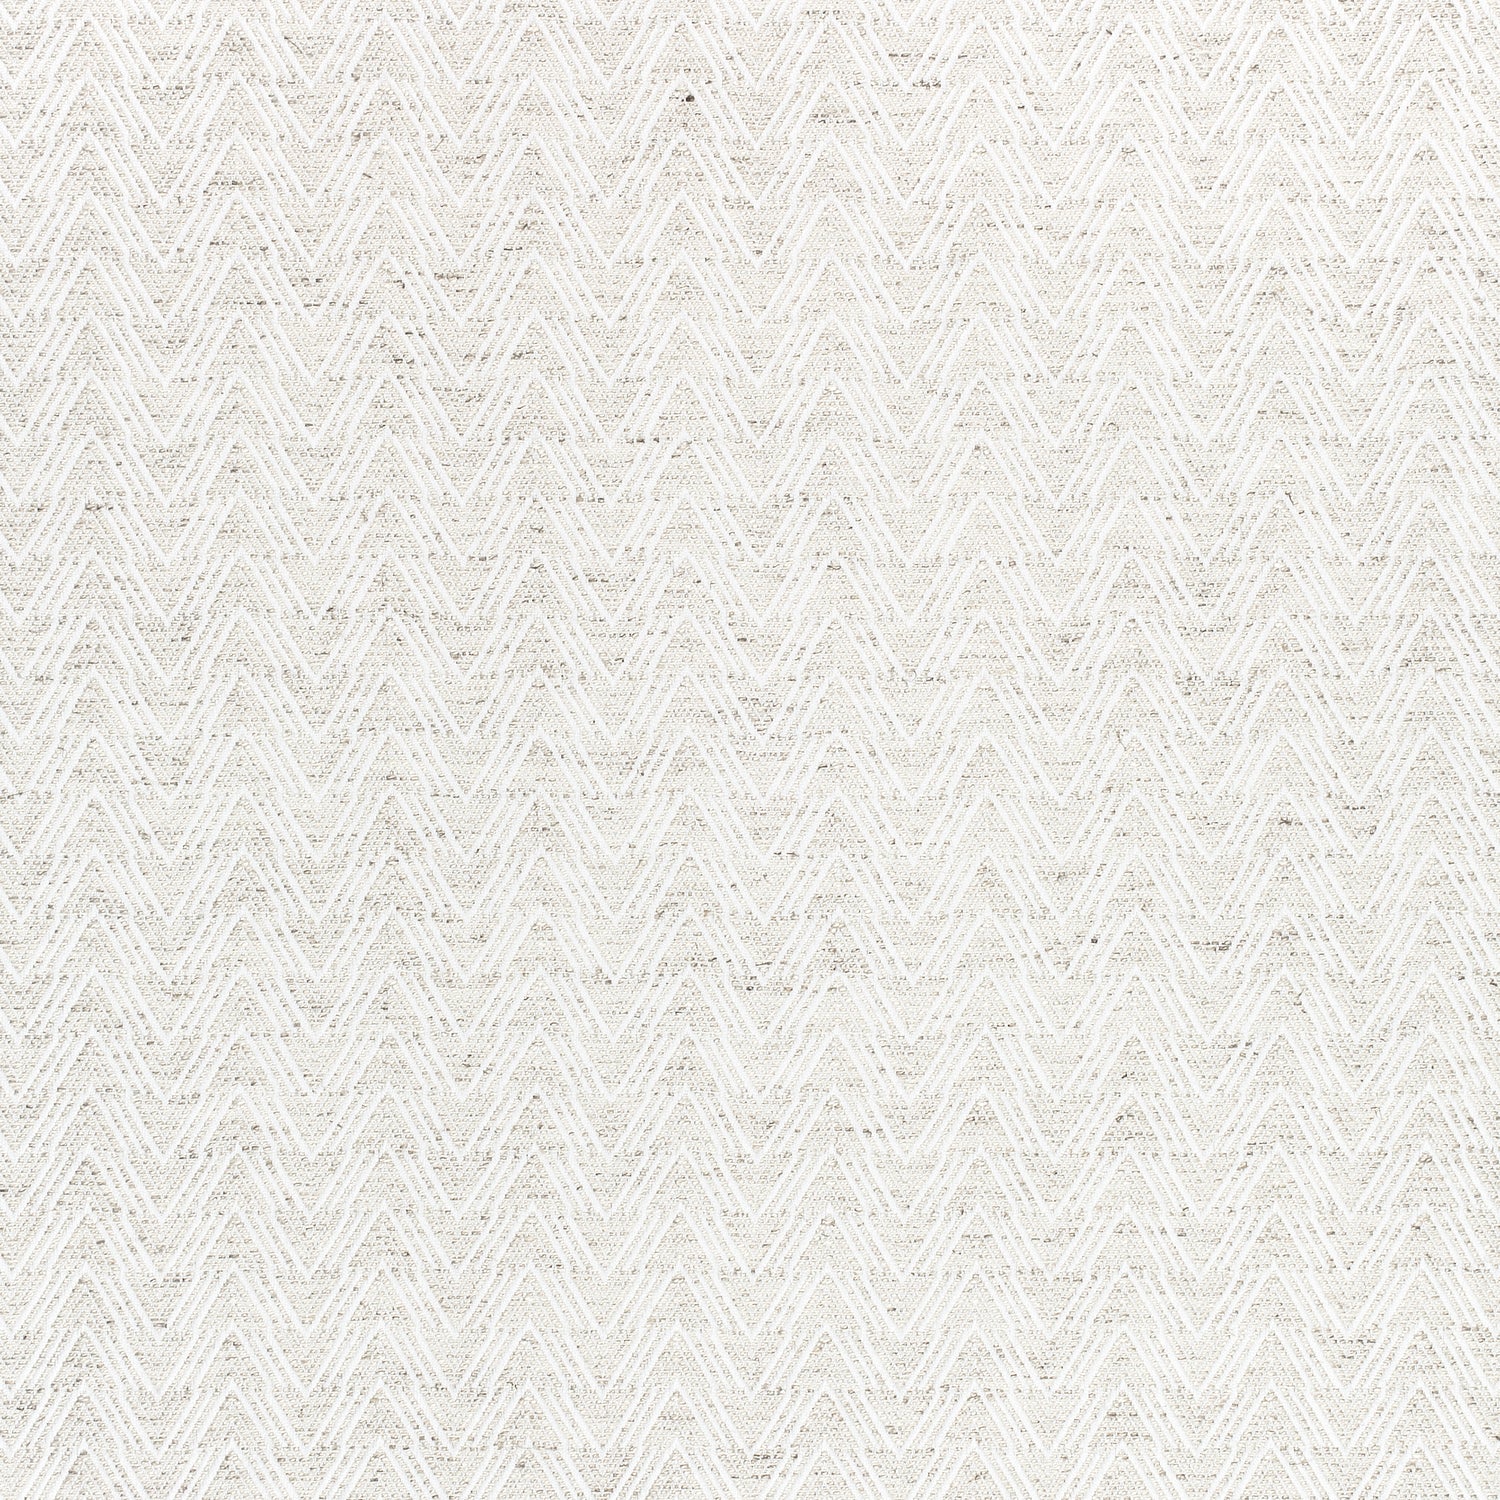 Gatsby fabric in oyster color - pattern number W80646 - by Thibaut in the Pinnacle collection